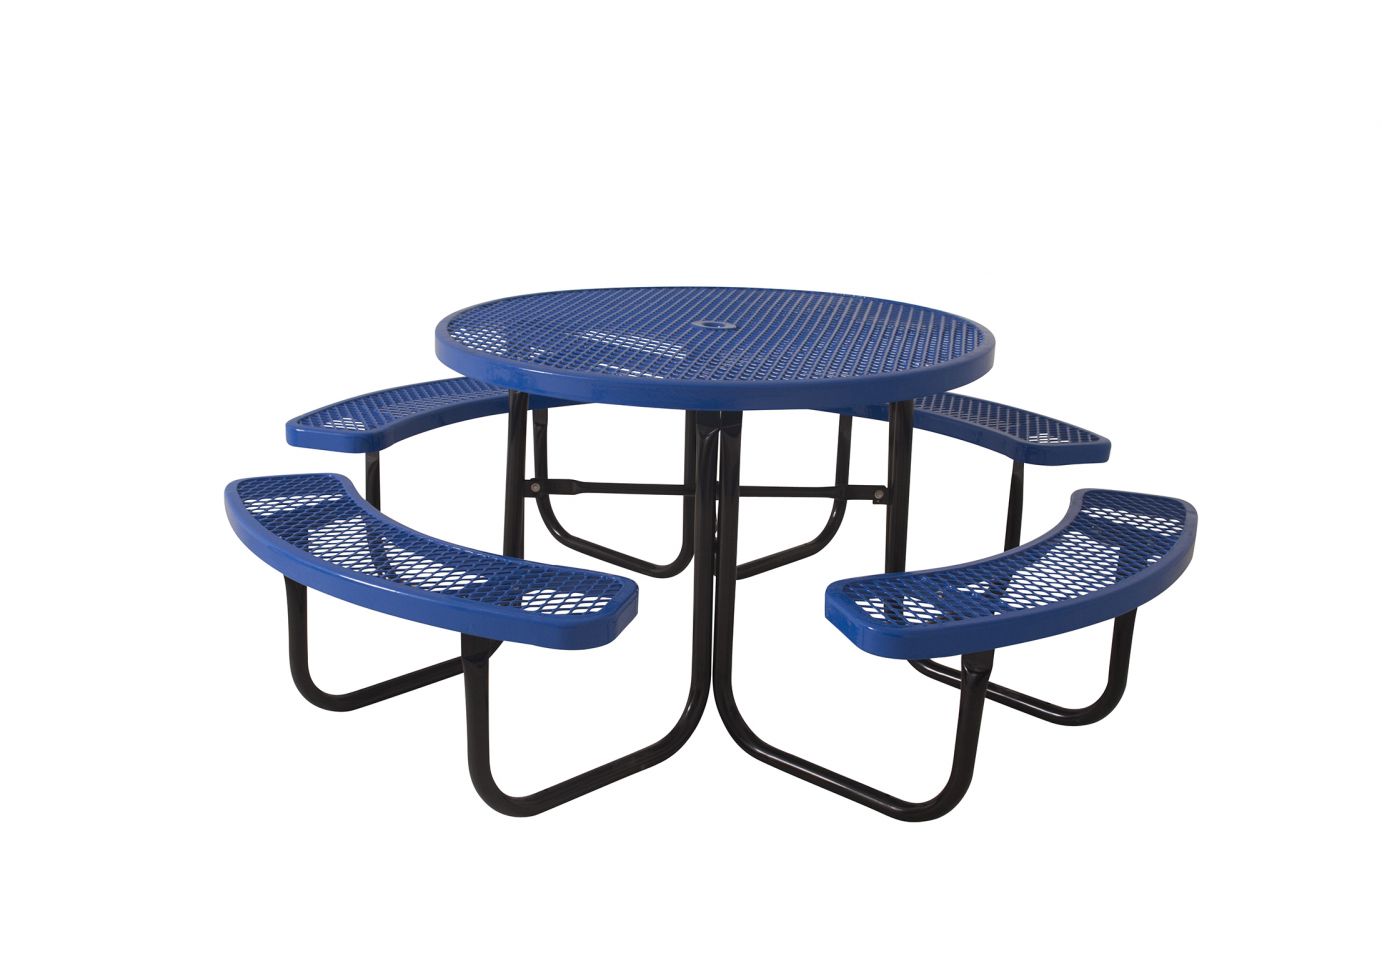 ADA 3-Seat Table with Round Arms